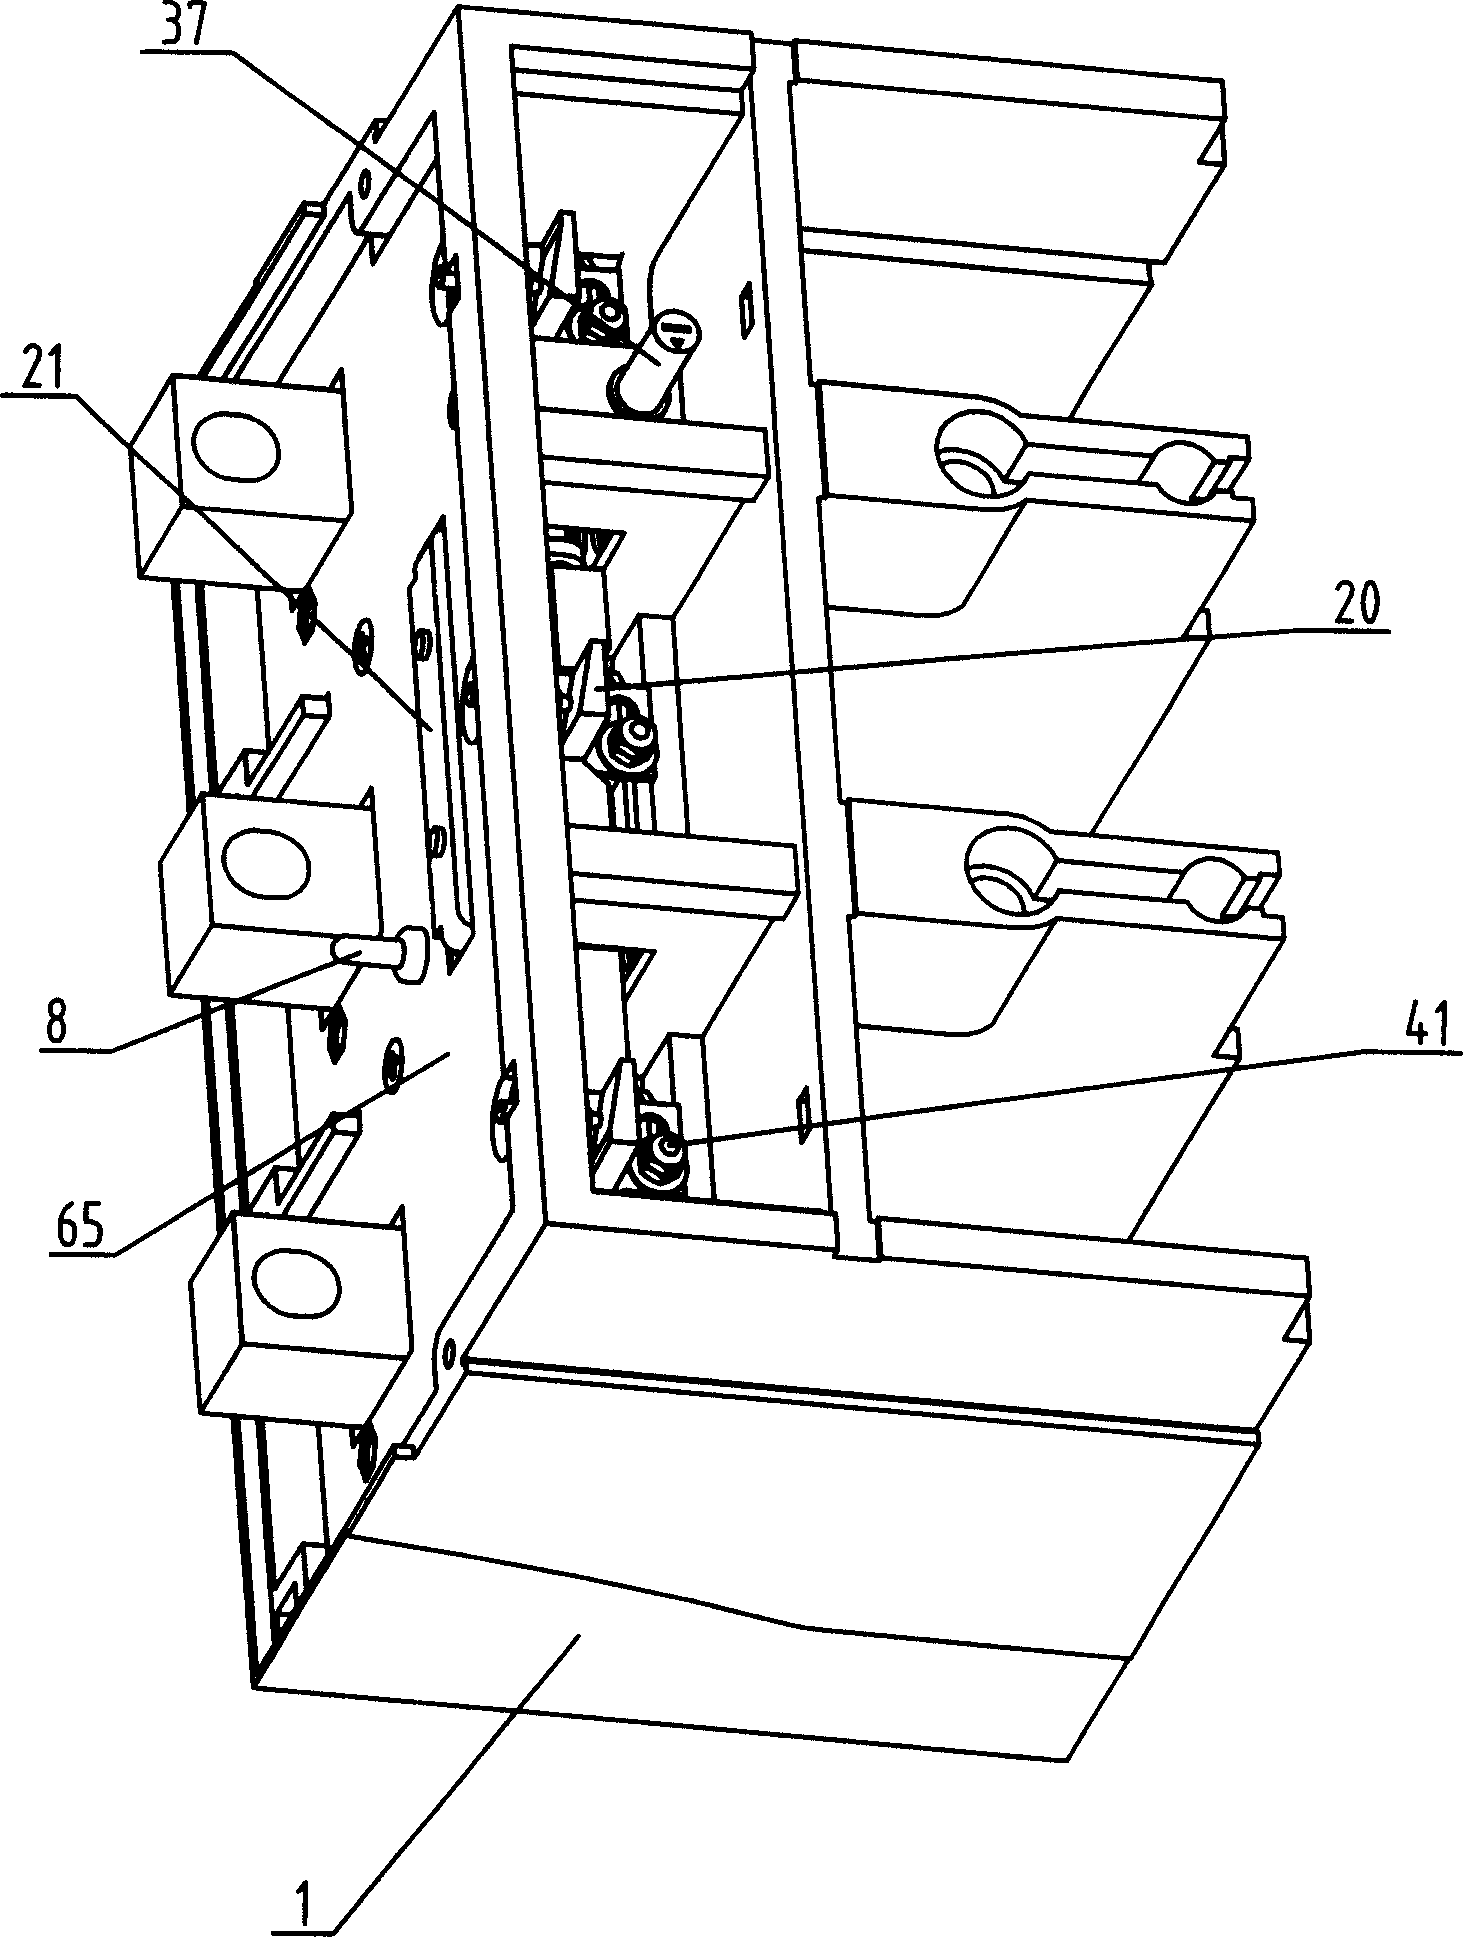 Split thermomagnetic adjustable release device for circuit breaker